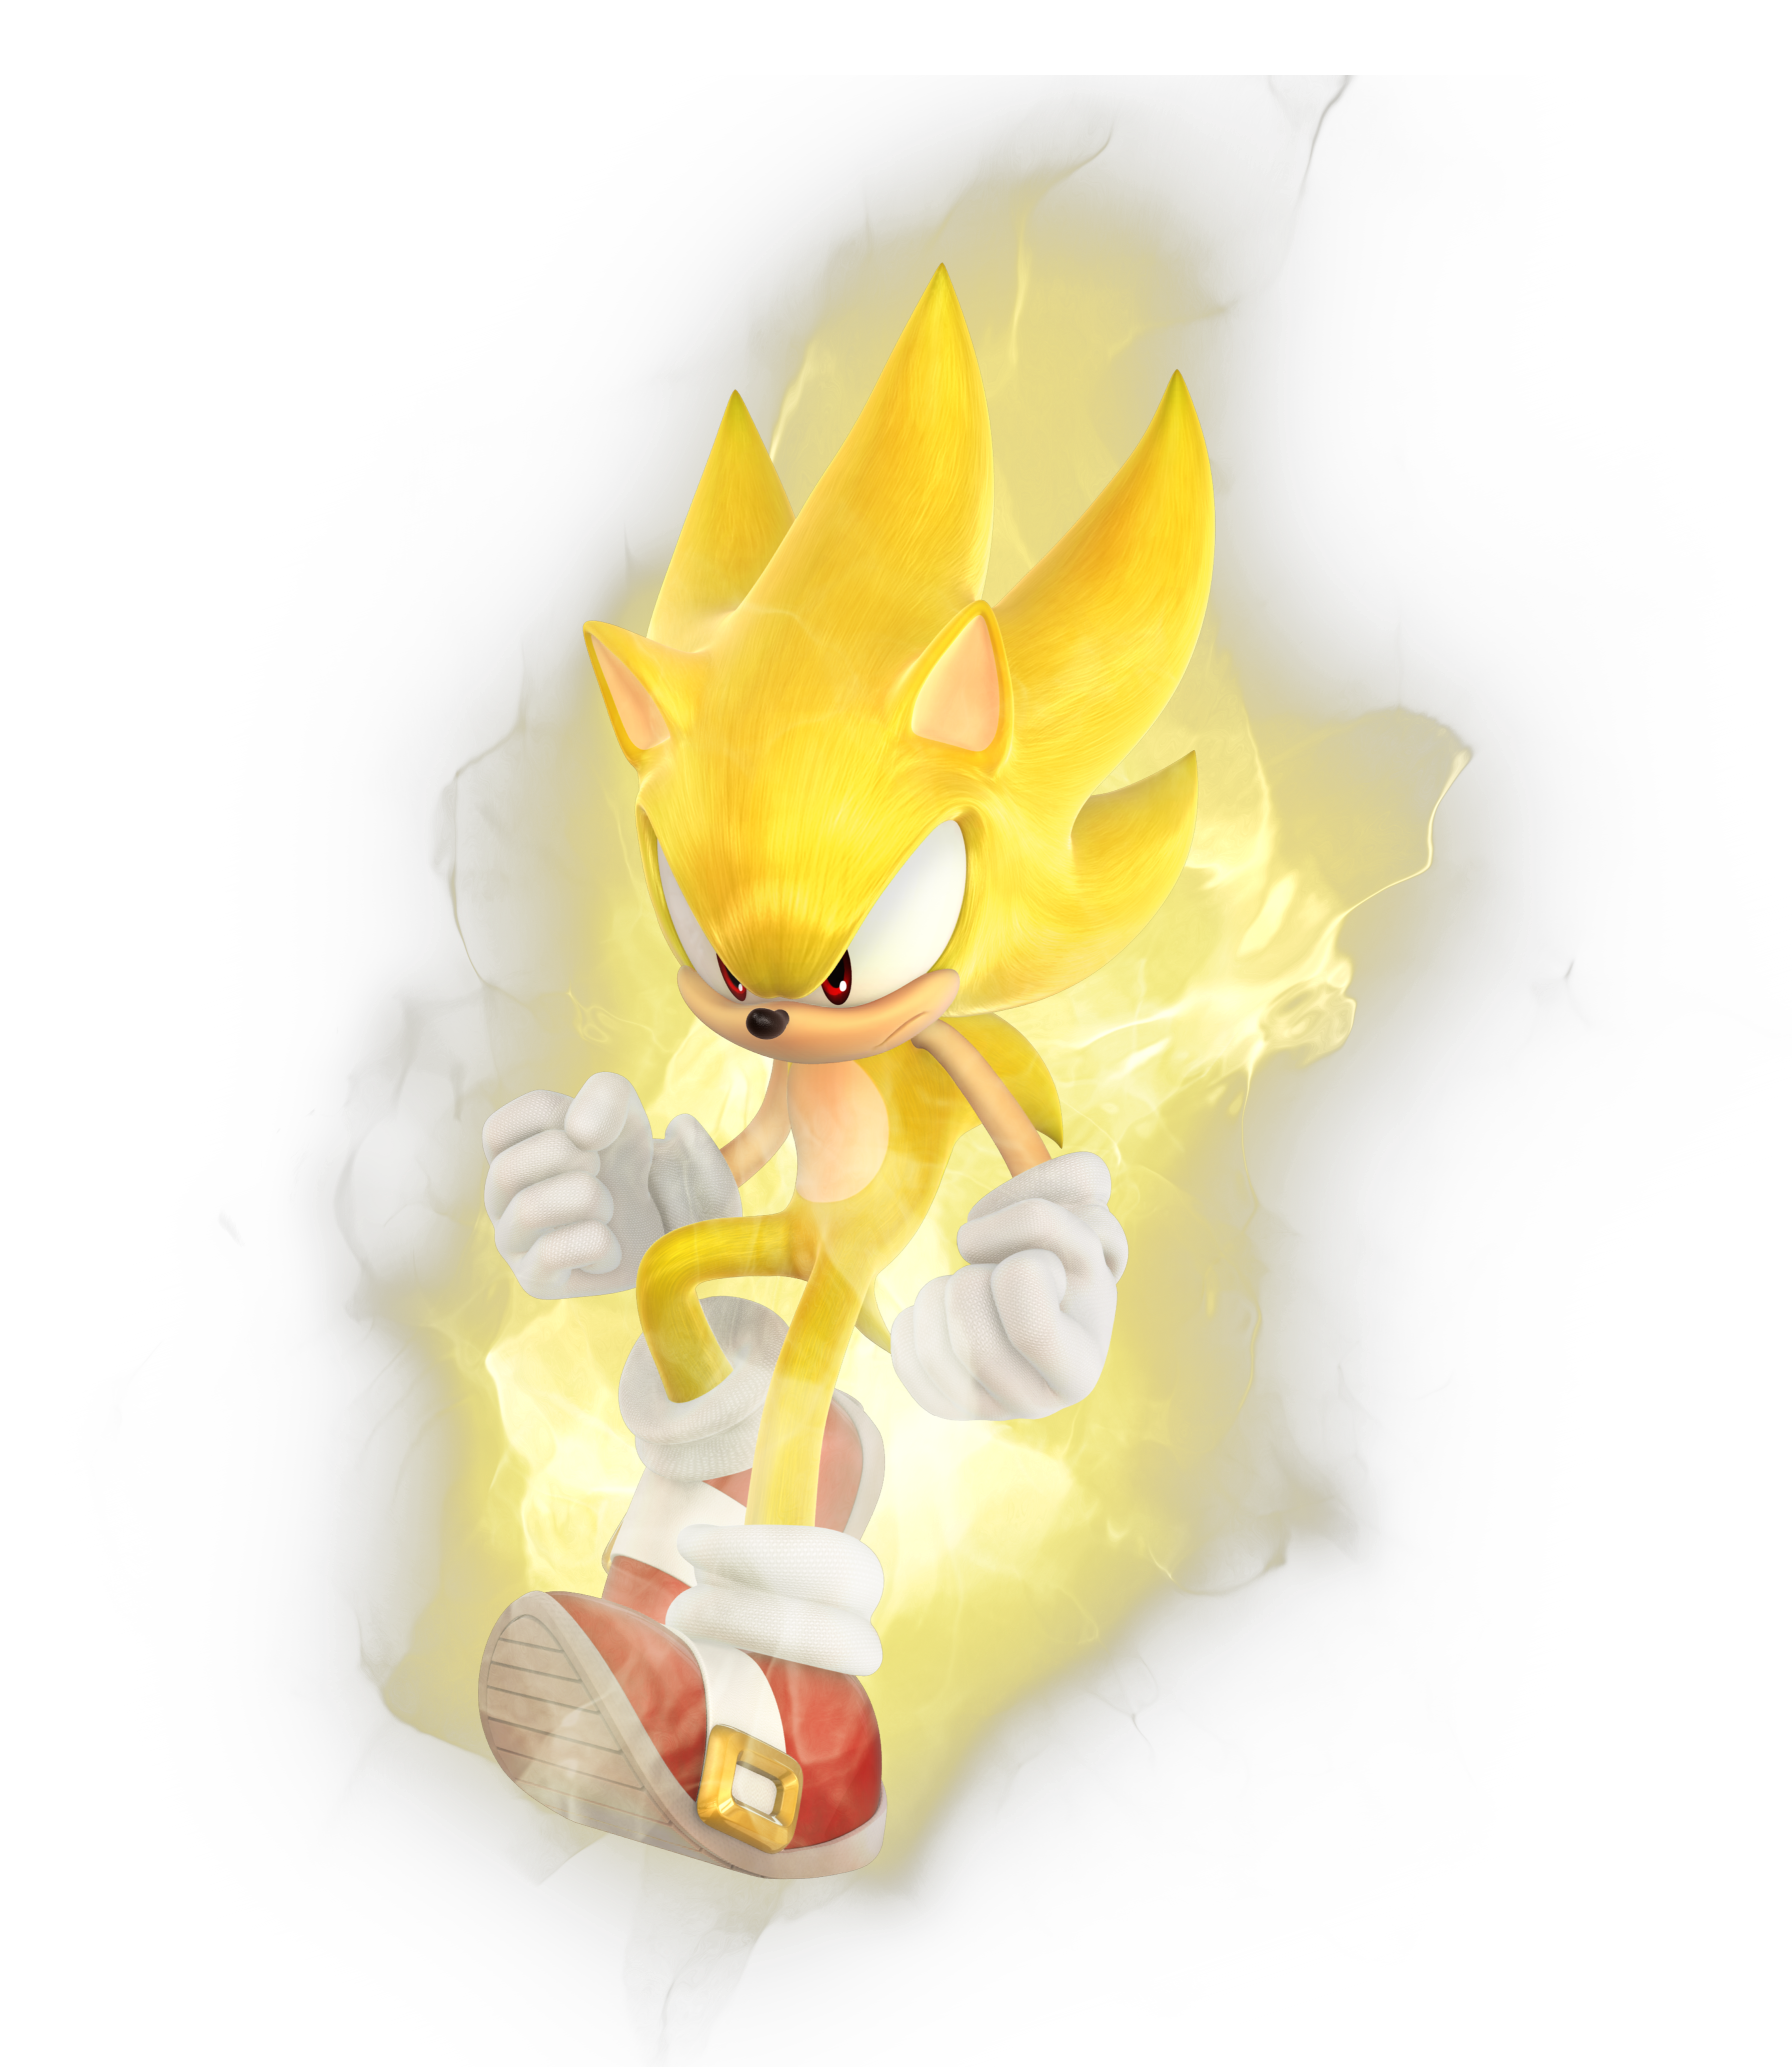 Super Sonic, Fictional Characters Wiki